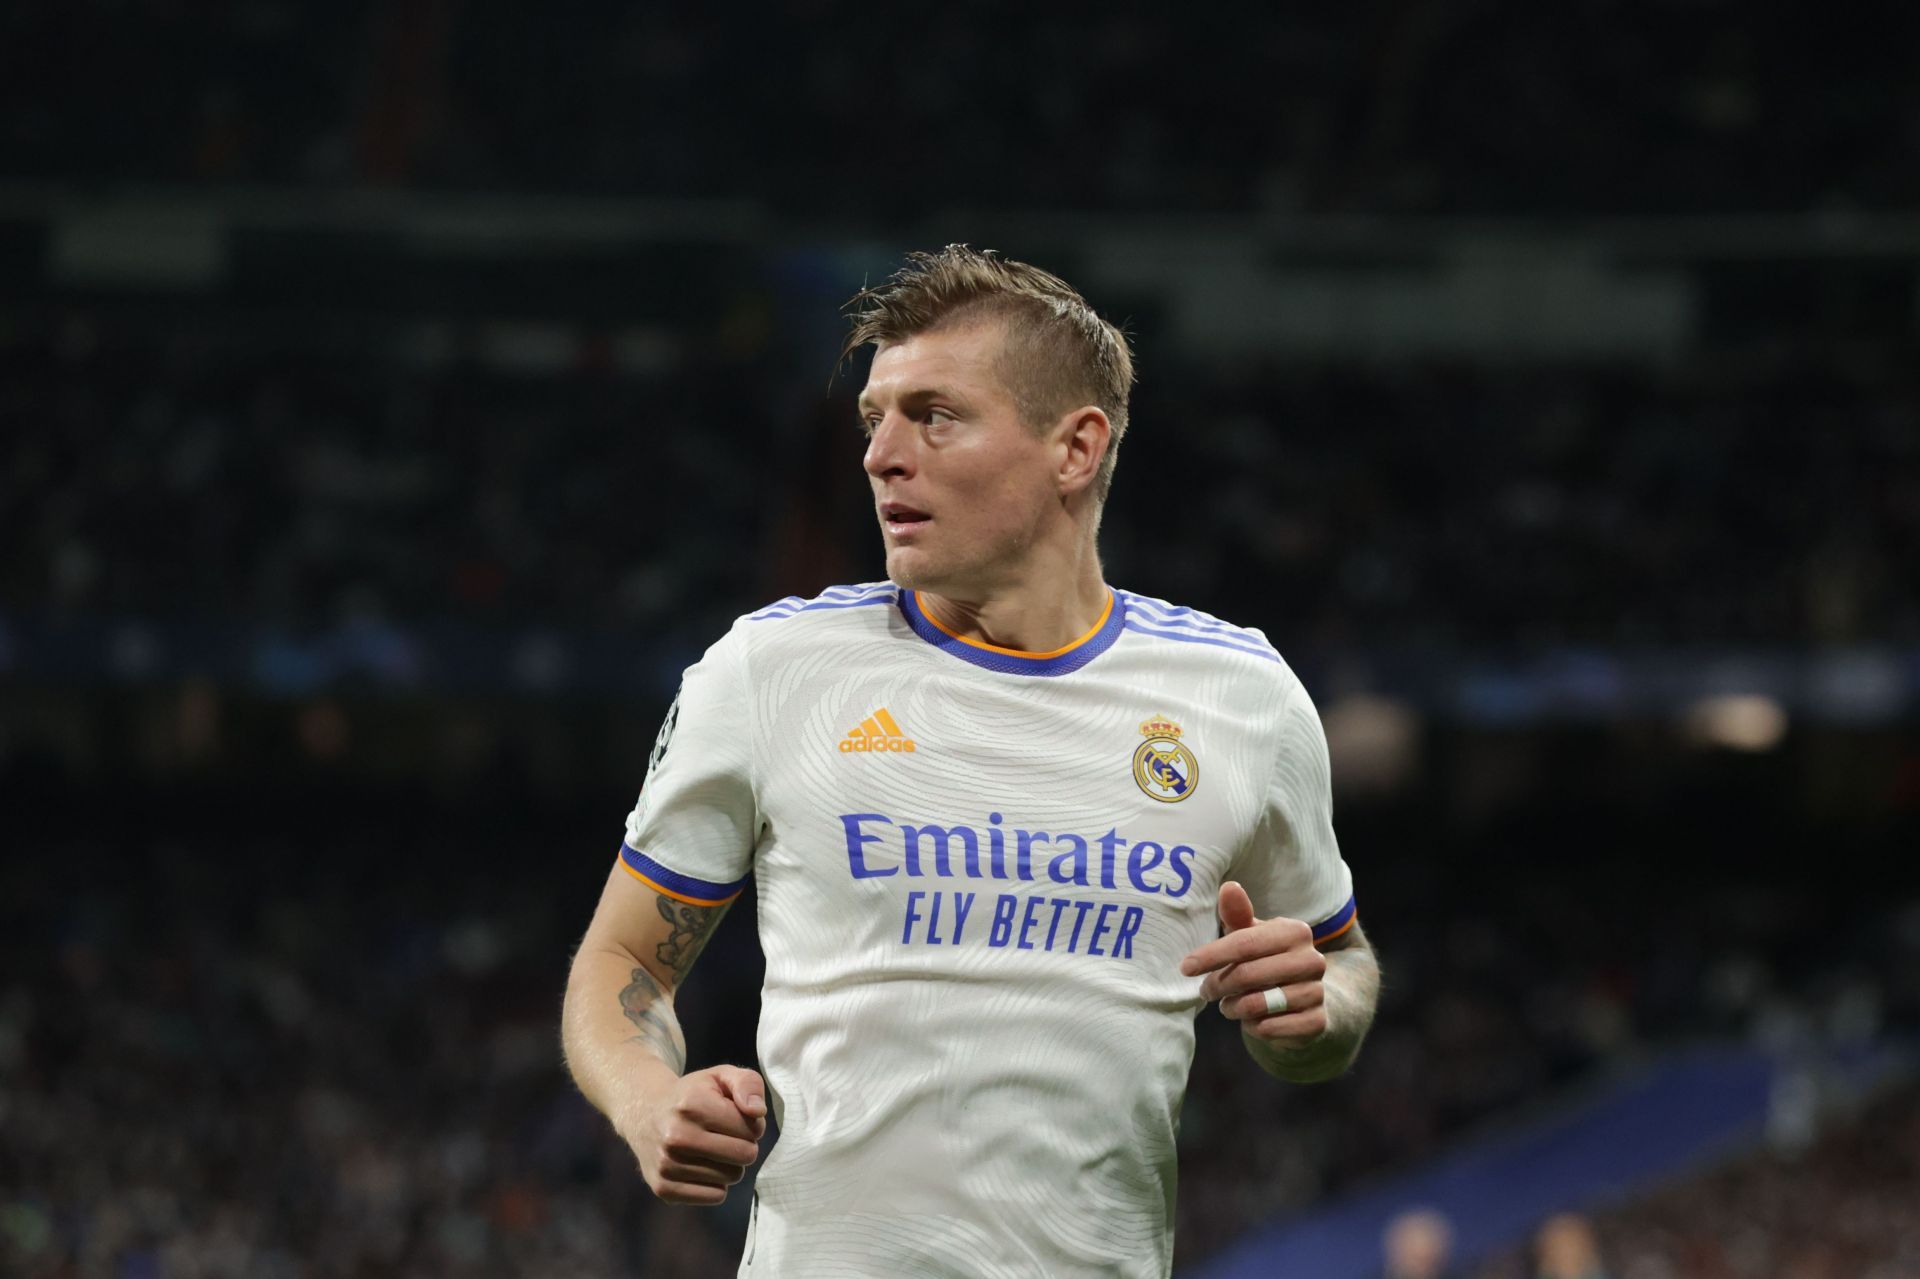 Toni Kroos is fit and raring to go